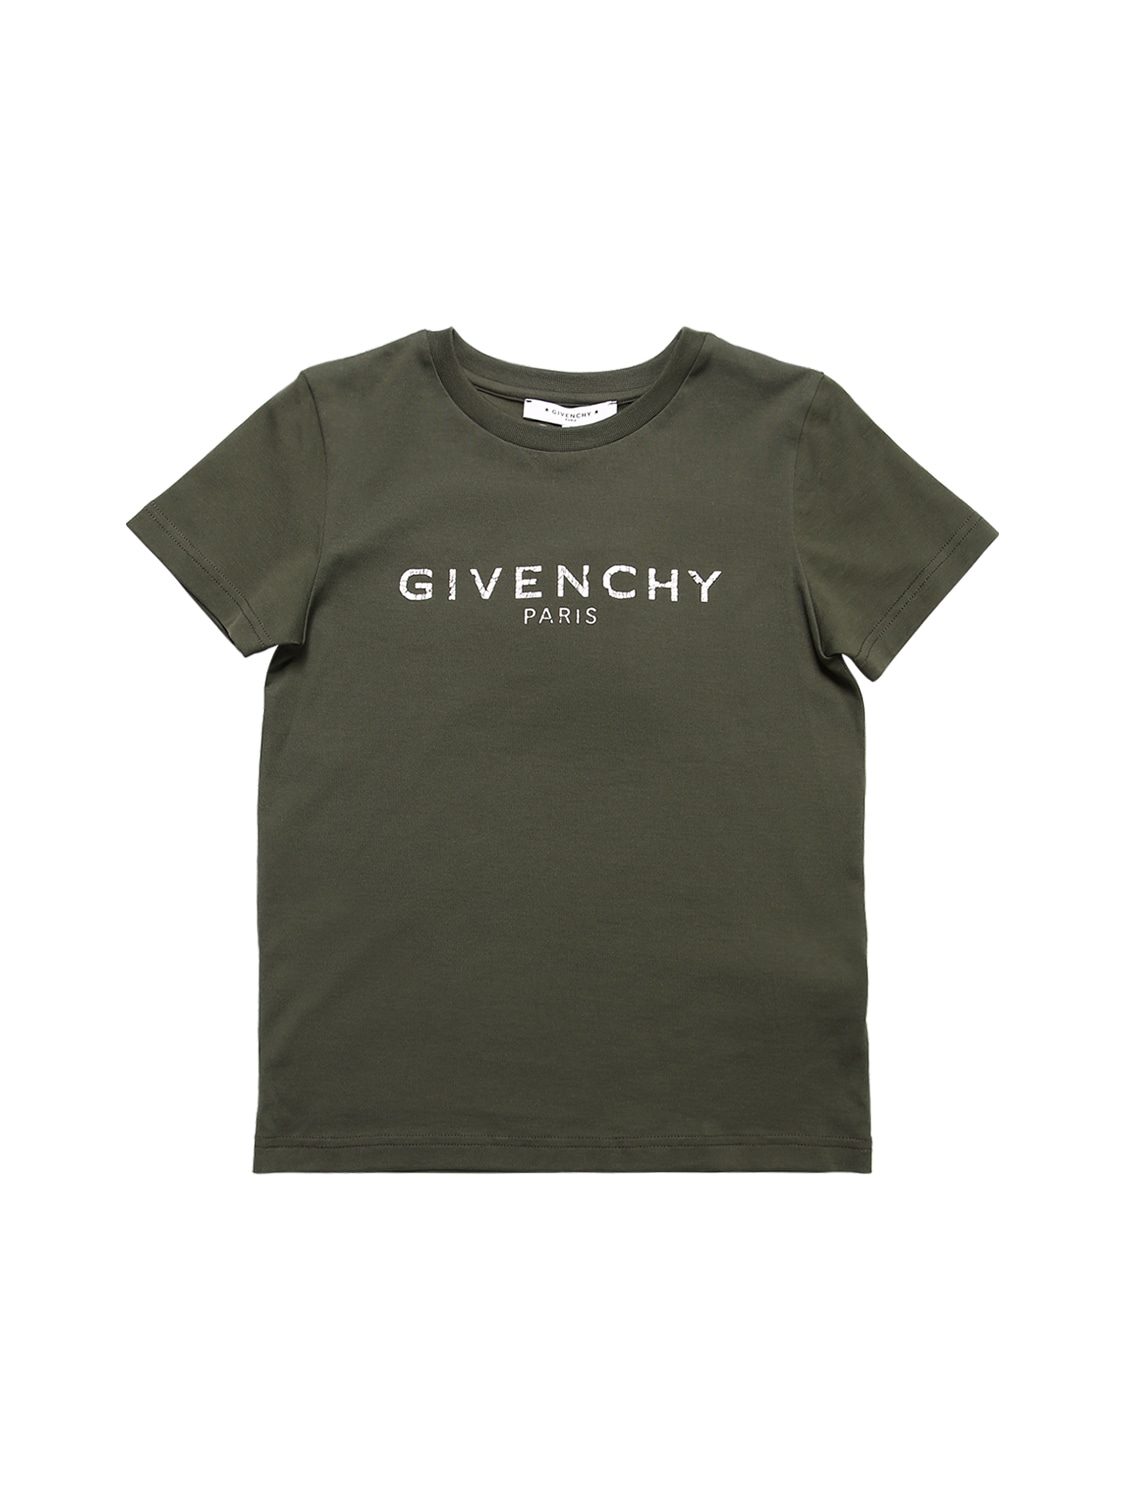 Givenchy Kids' Logo Printed Cotton Jersey T-shirt In Military Green